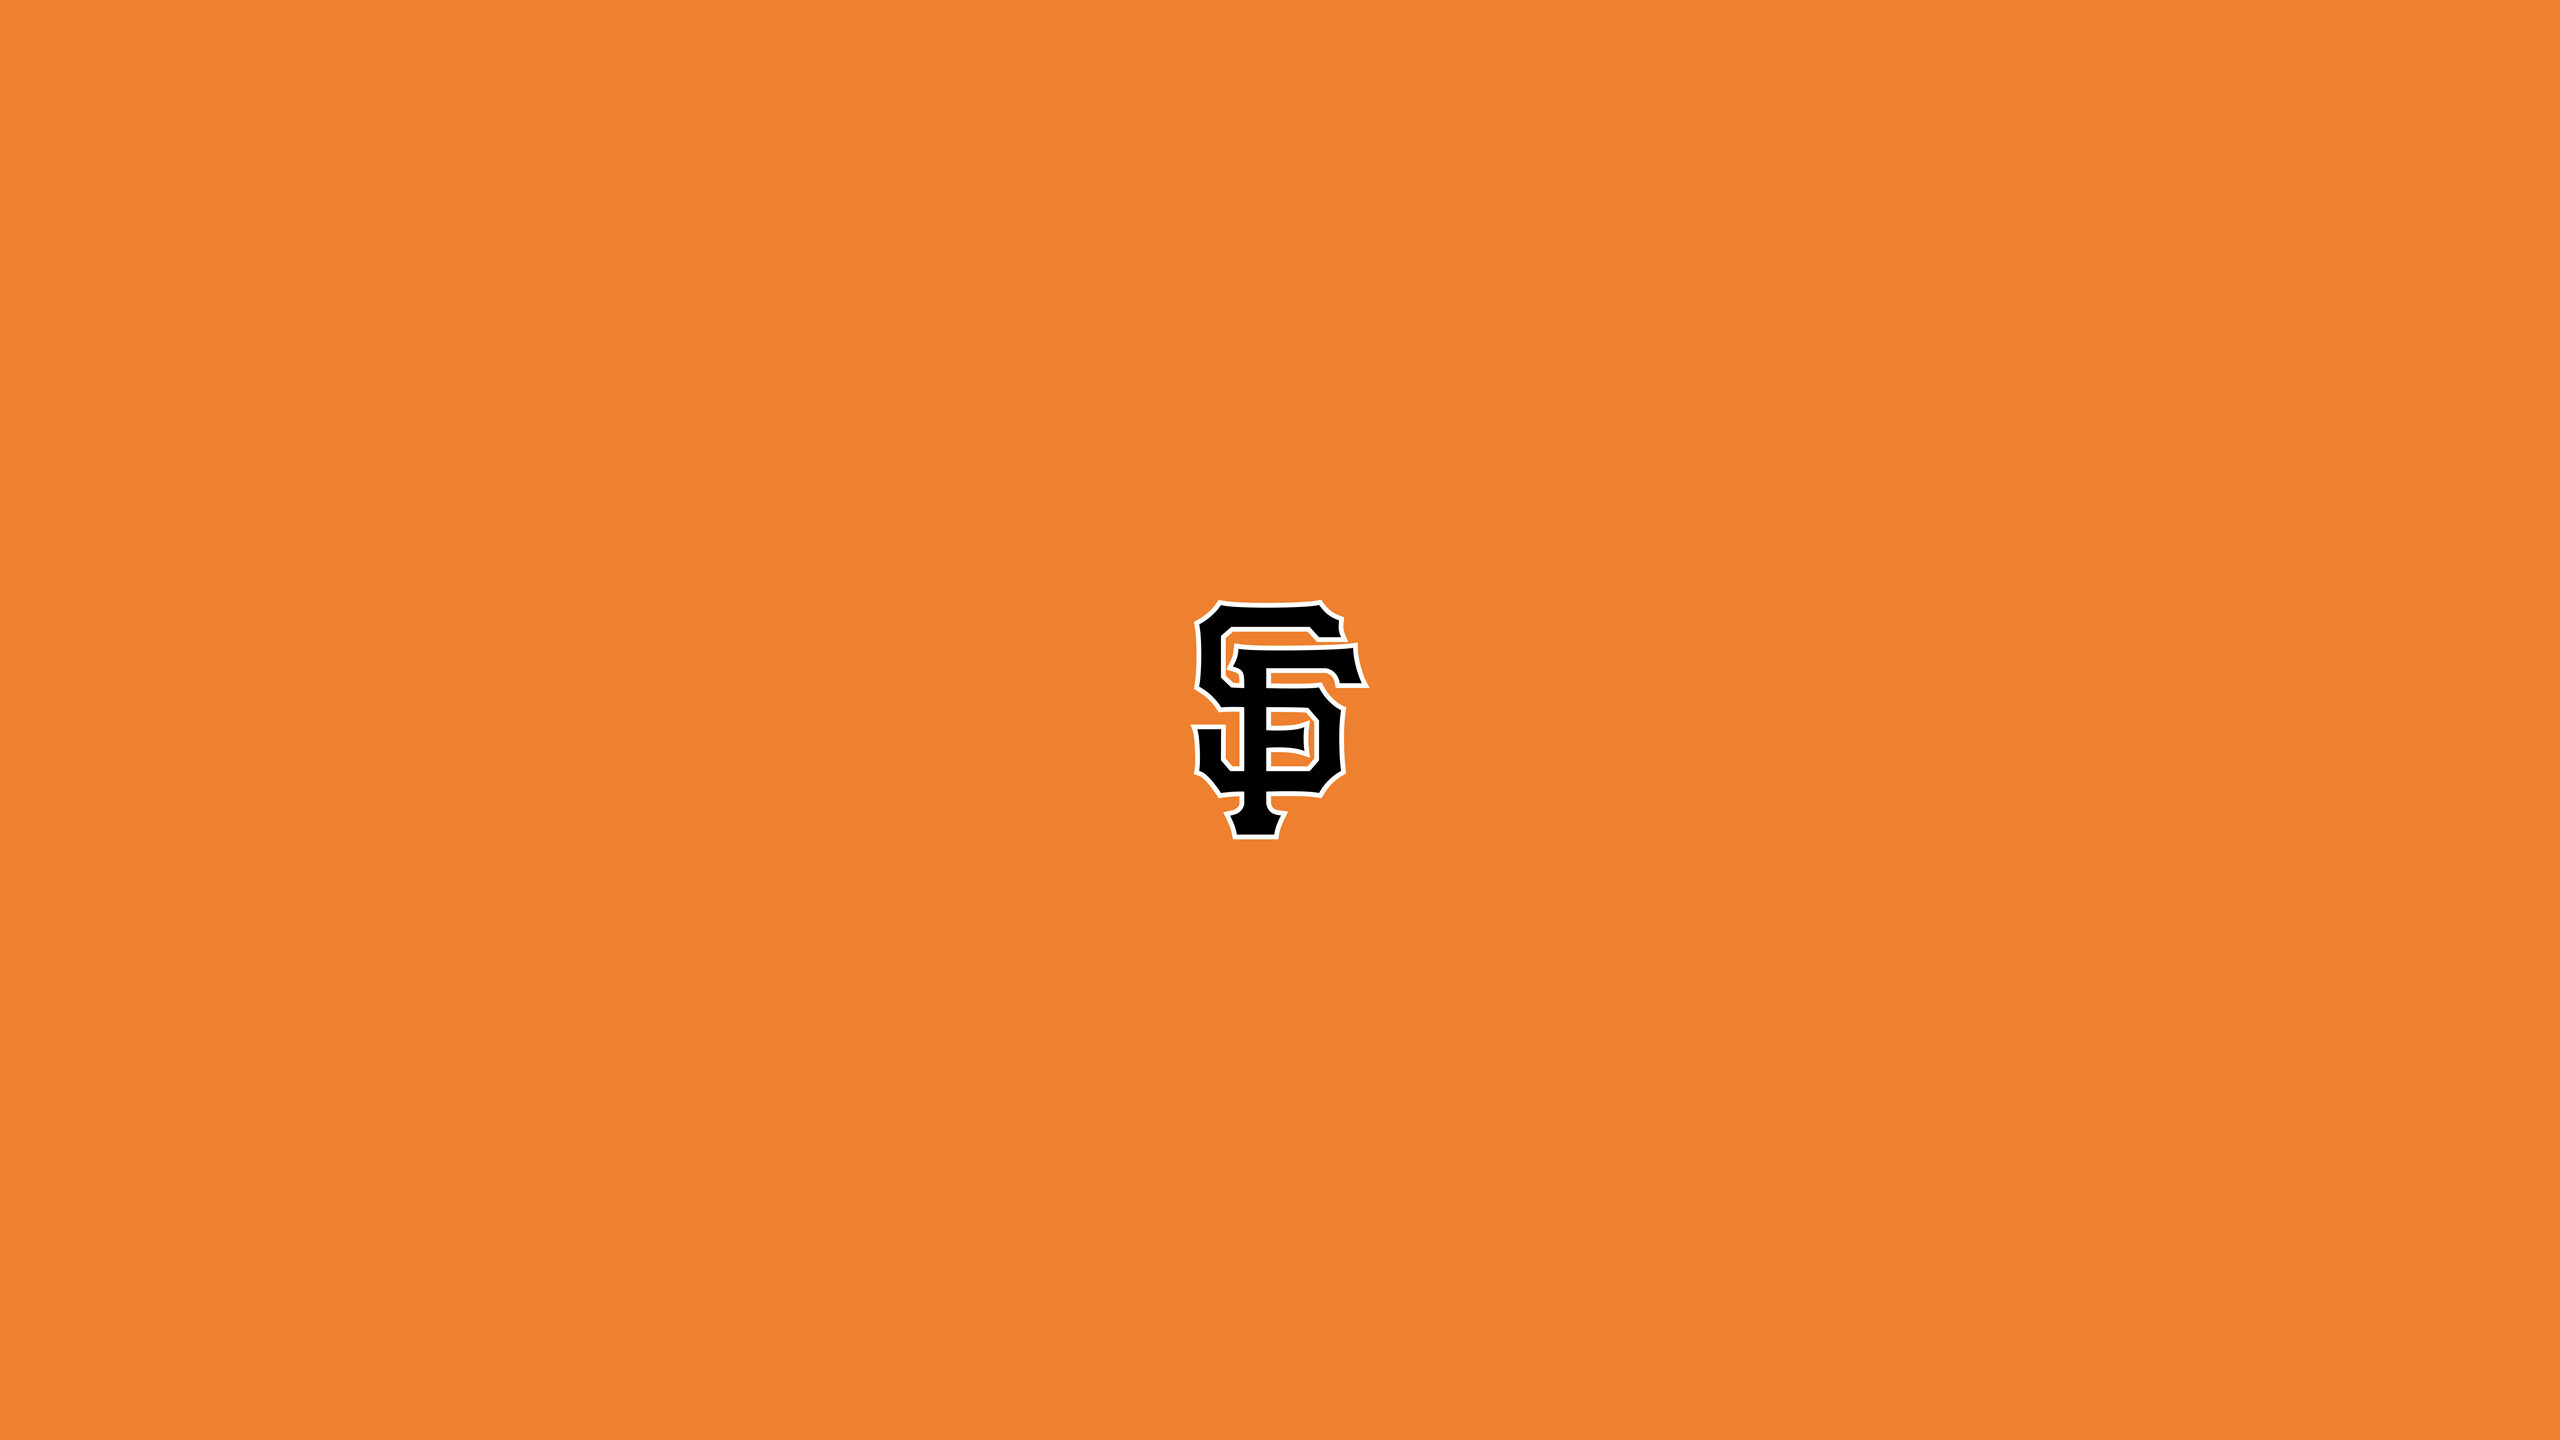 San Francisco Giants: The team was renamed the New York Giants in 1886. 2560x1440 HD Background.